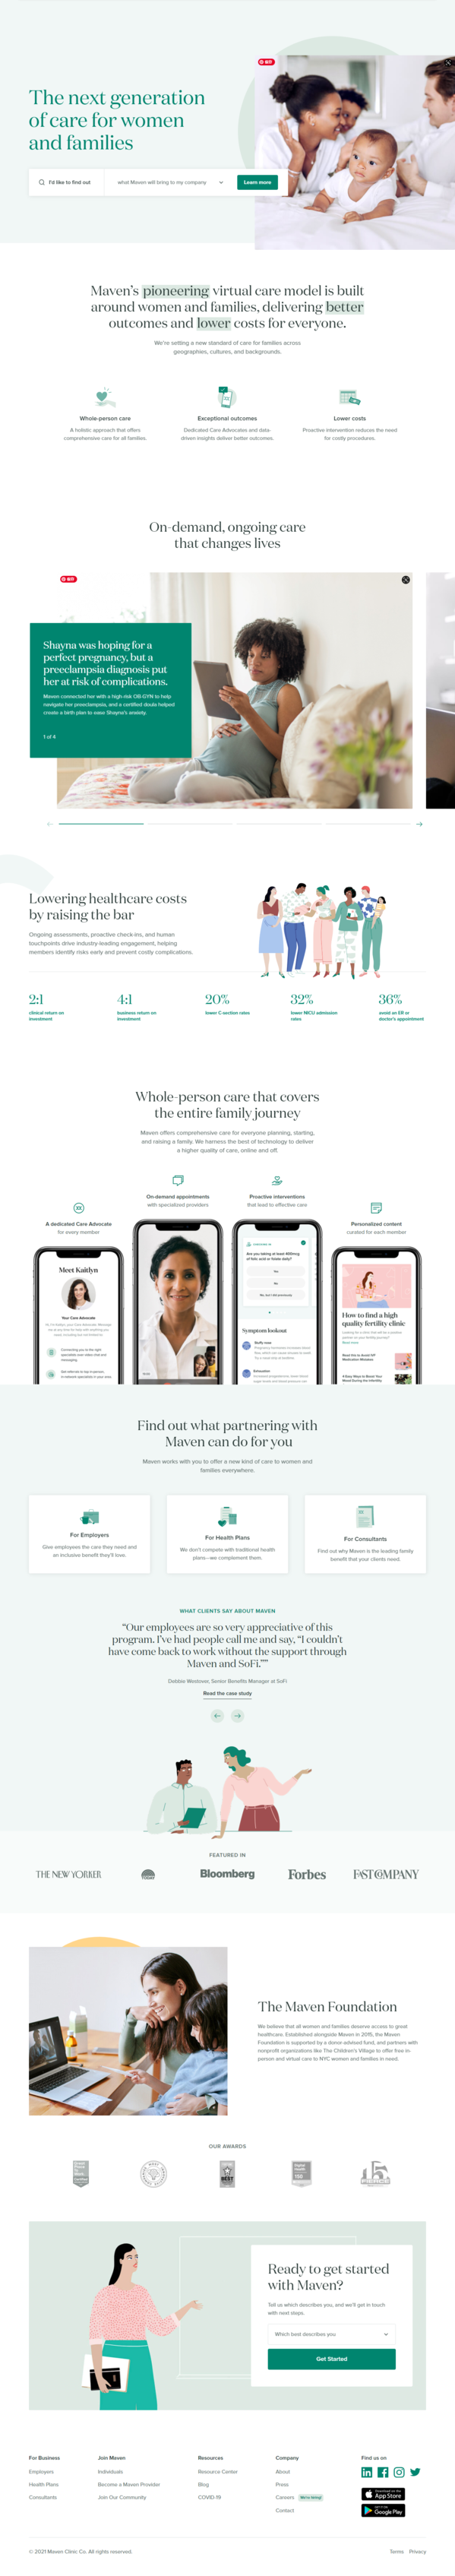 - Maven - The next generation of care for women and families_ - www.mavenclinic.com.png